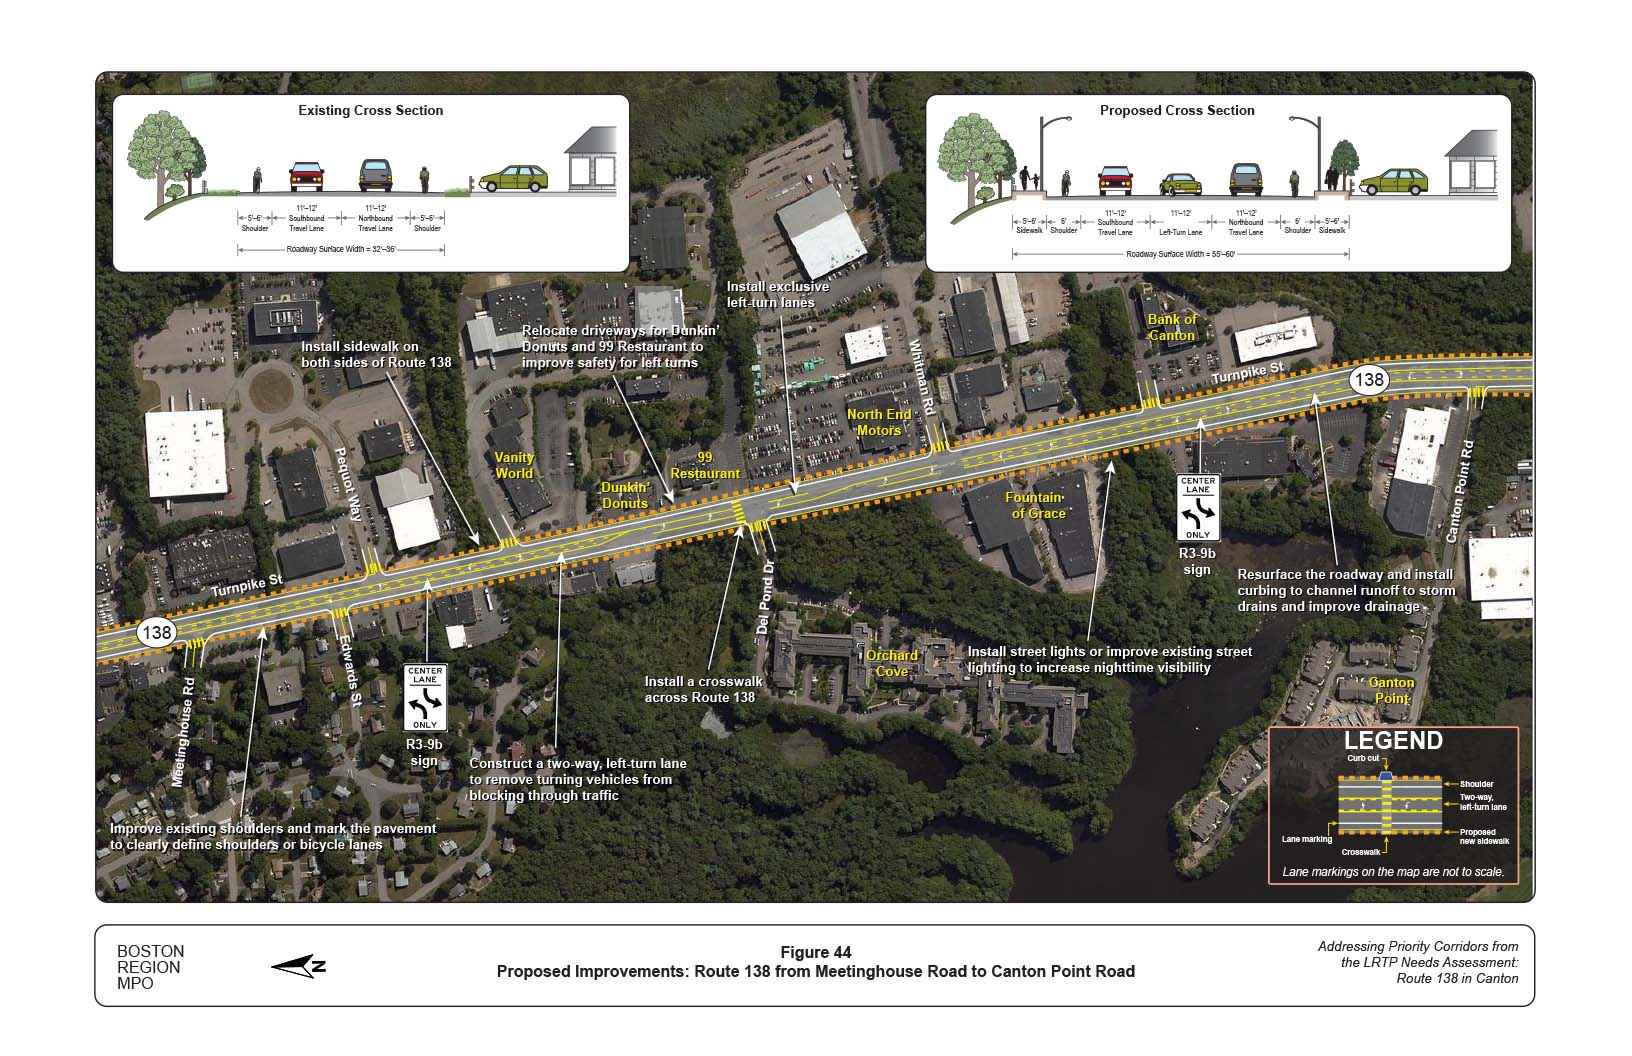 Figure 44 is map of Route 138 from Meetinghouse Road to Canton Point Road with overlays showing the proposed improvements to the roadway and graphics of the current and proposed cross section of the roadway.